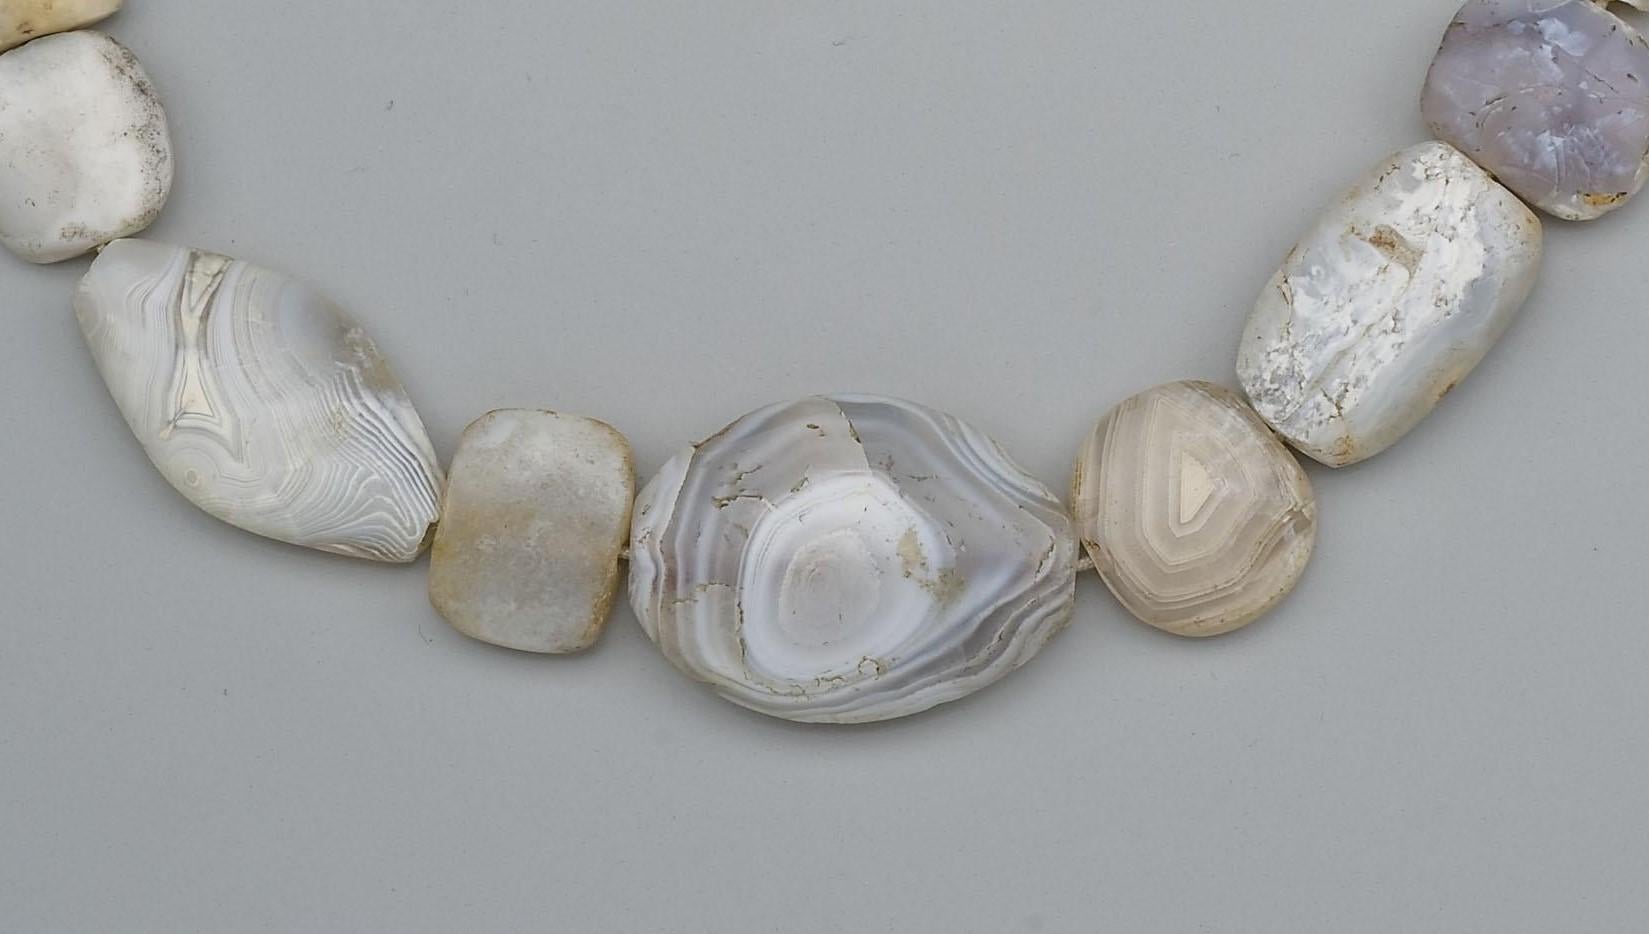 Twenty-four large agate beads of flattened shapes from the Bronze Age (approximately four thousand years ago). The dimensions of the beads are as follows (clockwise from the top):
1. Length 3 cm, width at center 1.79 cm, width at ends 1.2 cm,